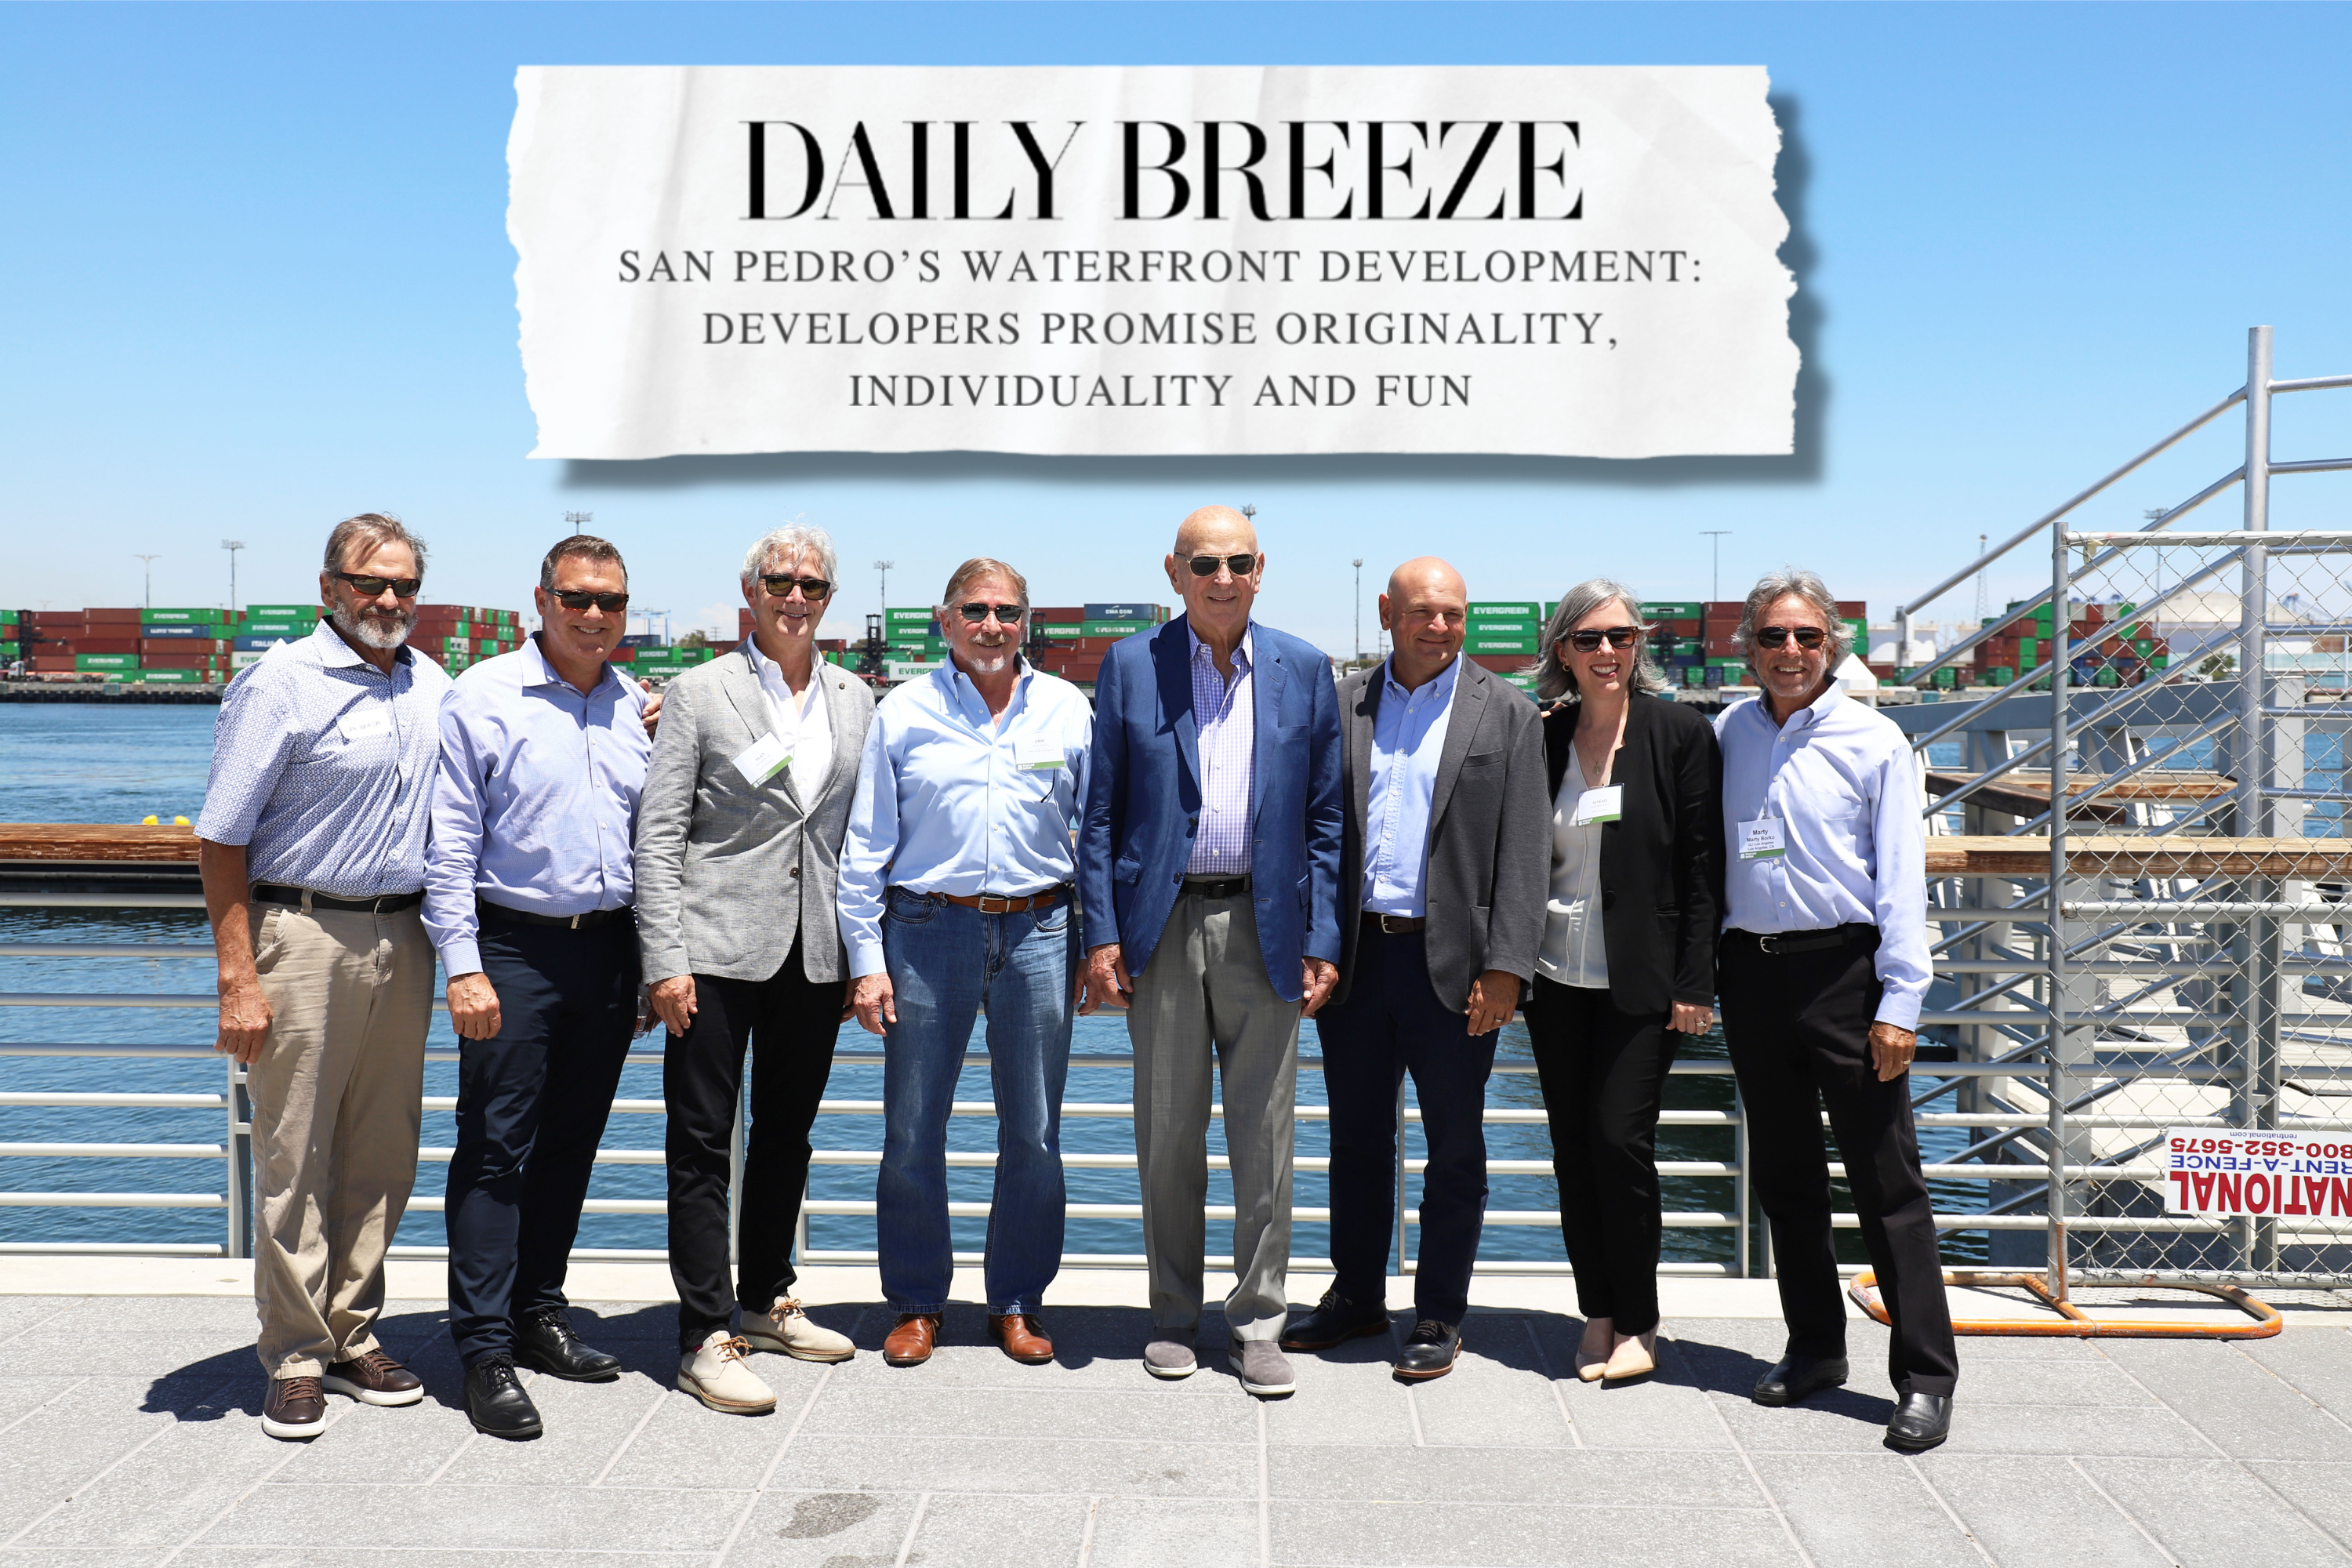 Daily Breeze: West Harbor Developers promise originality, individuality, and fun